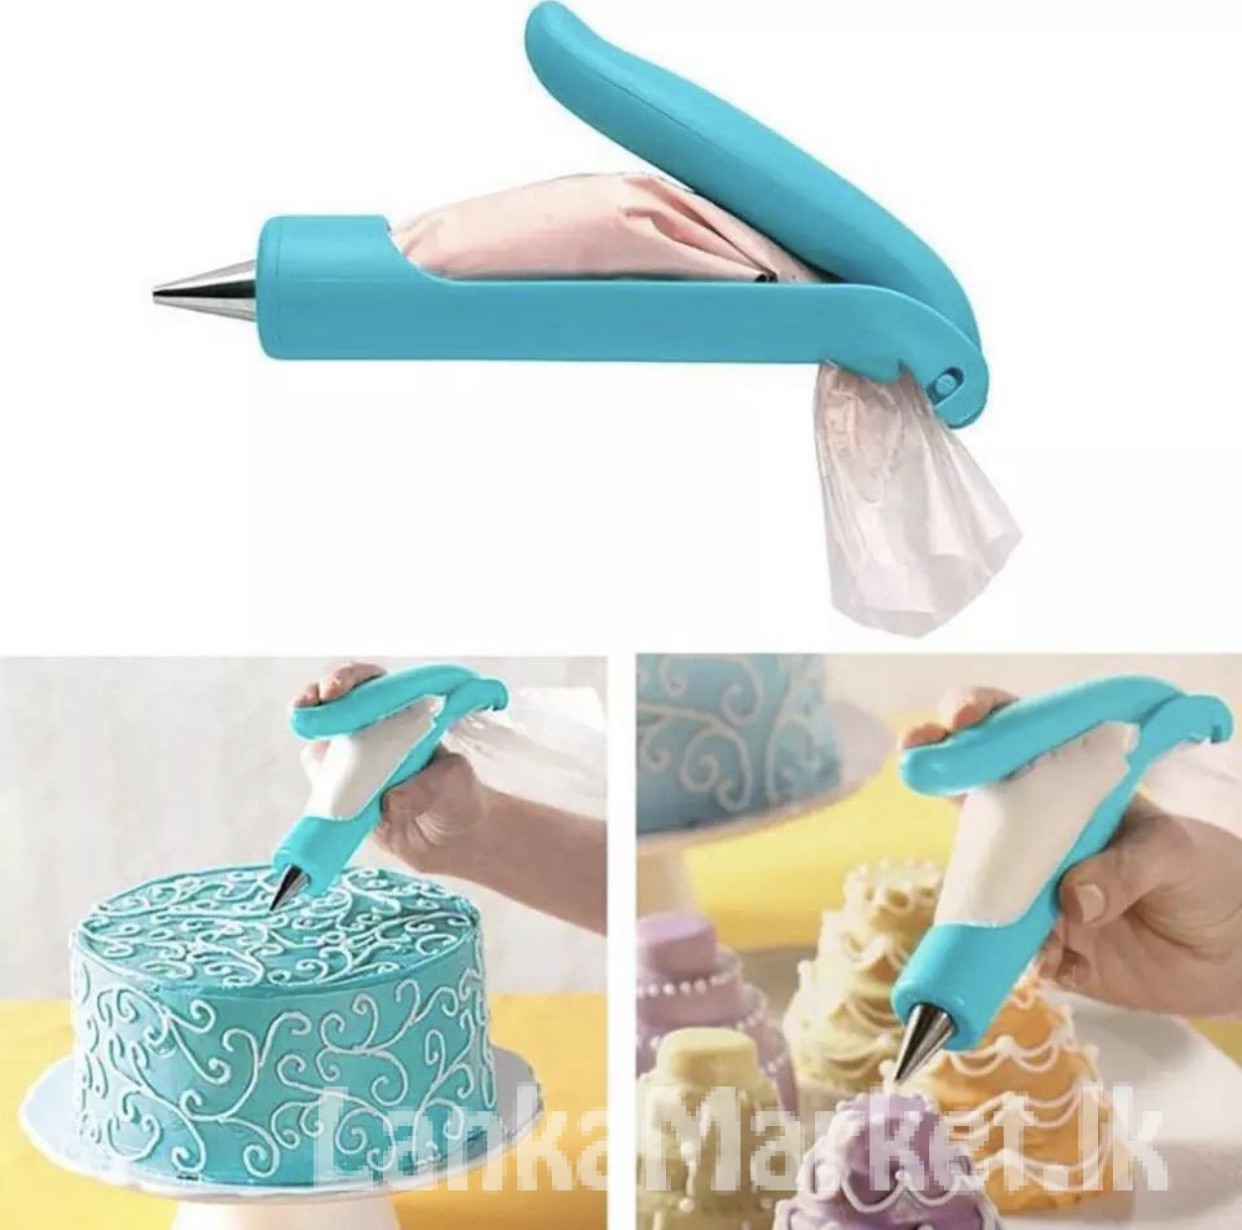 Icing pen and Tool Set